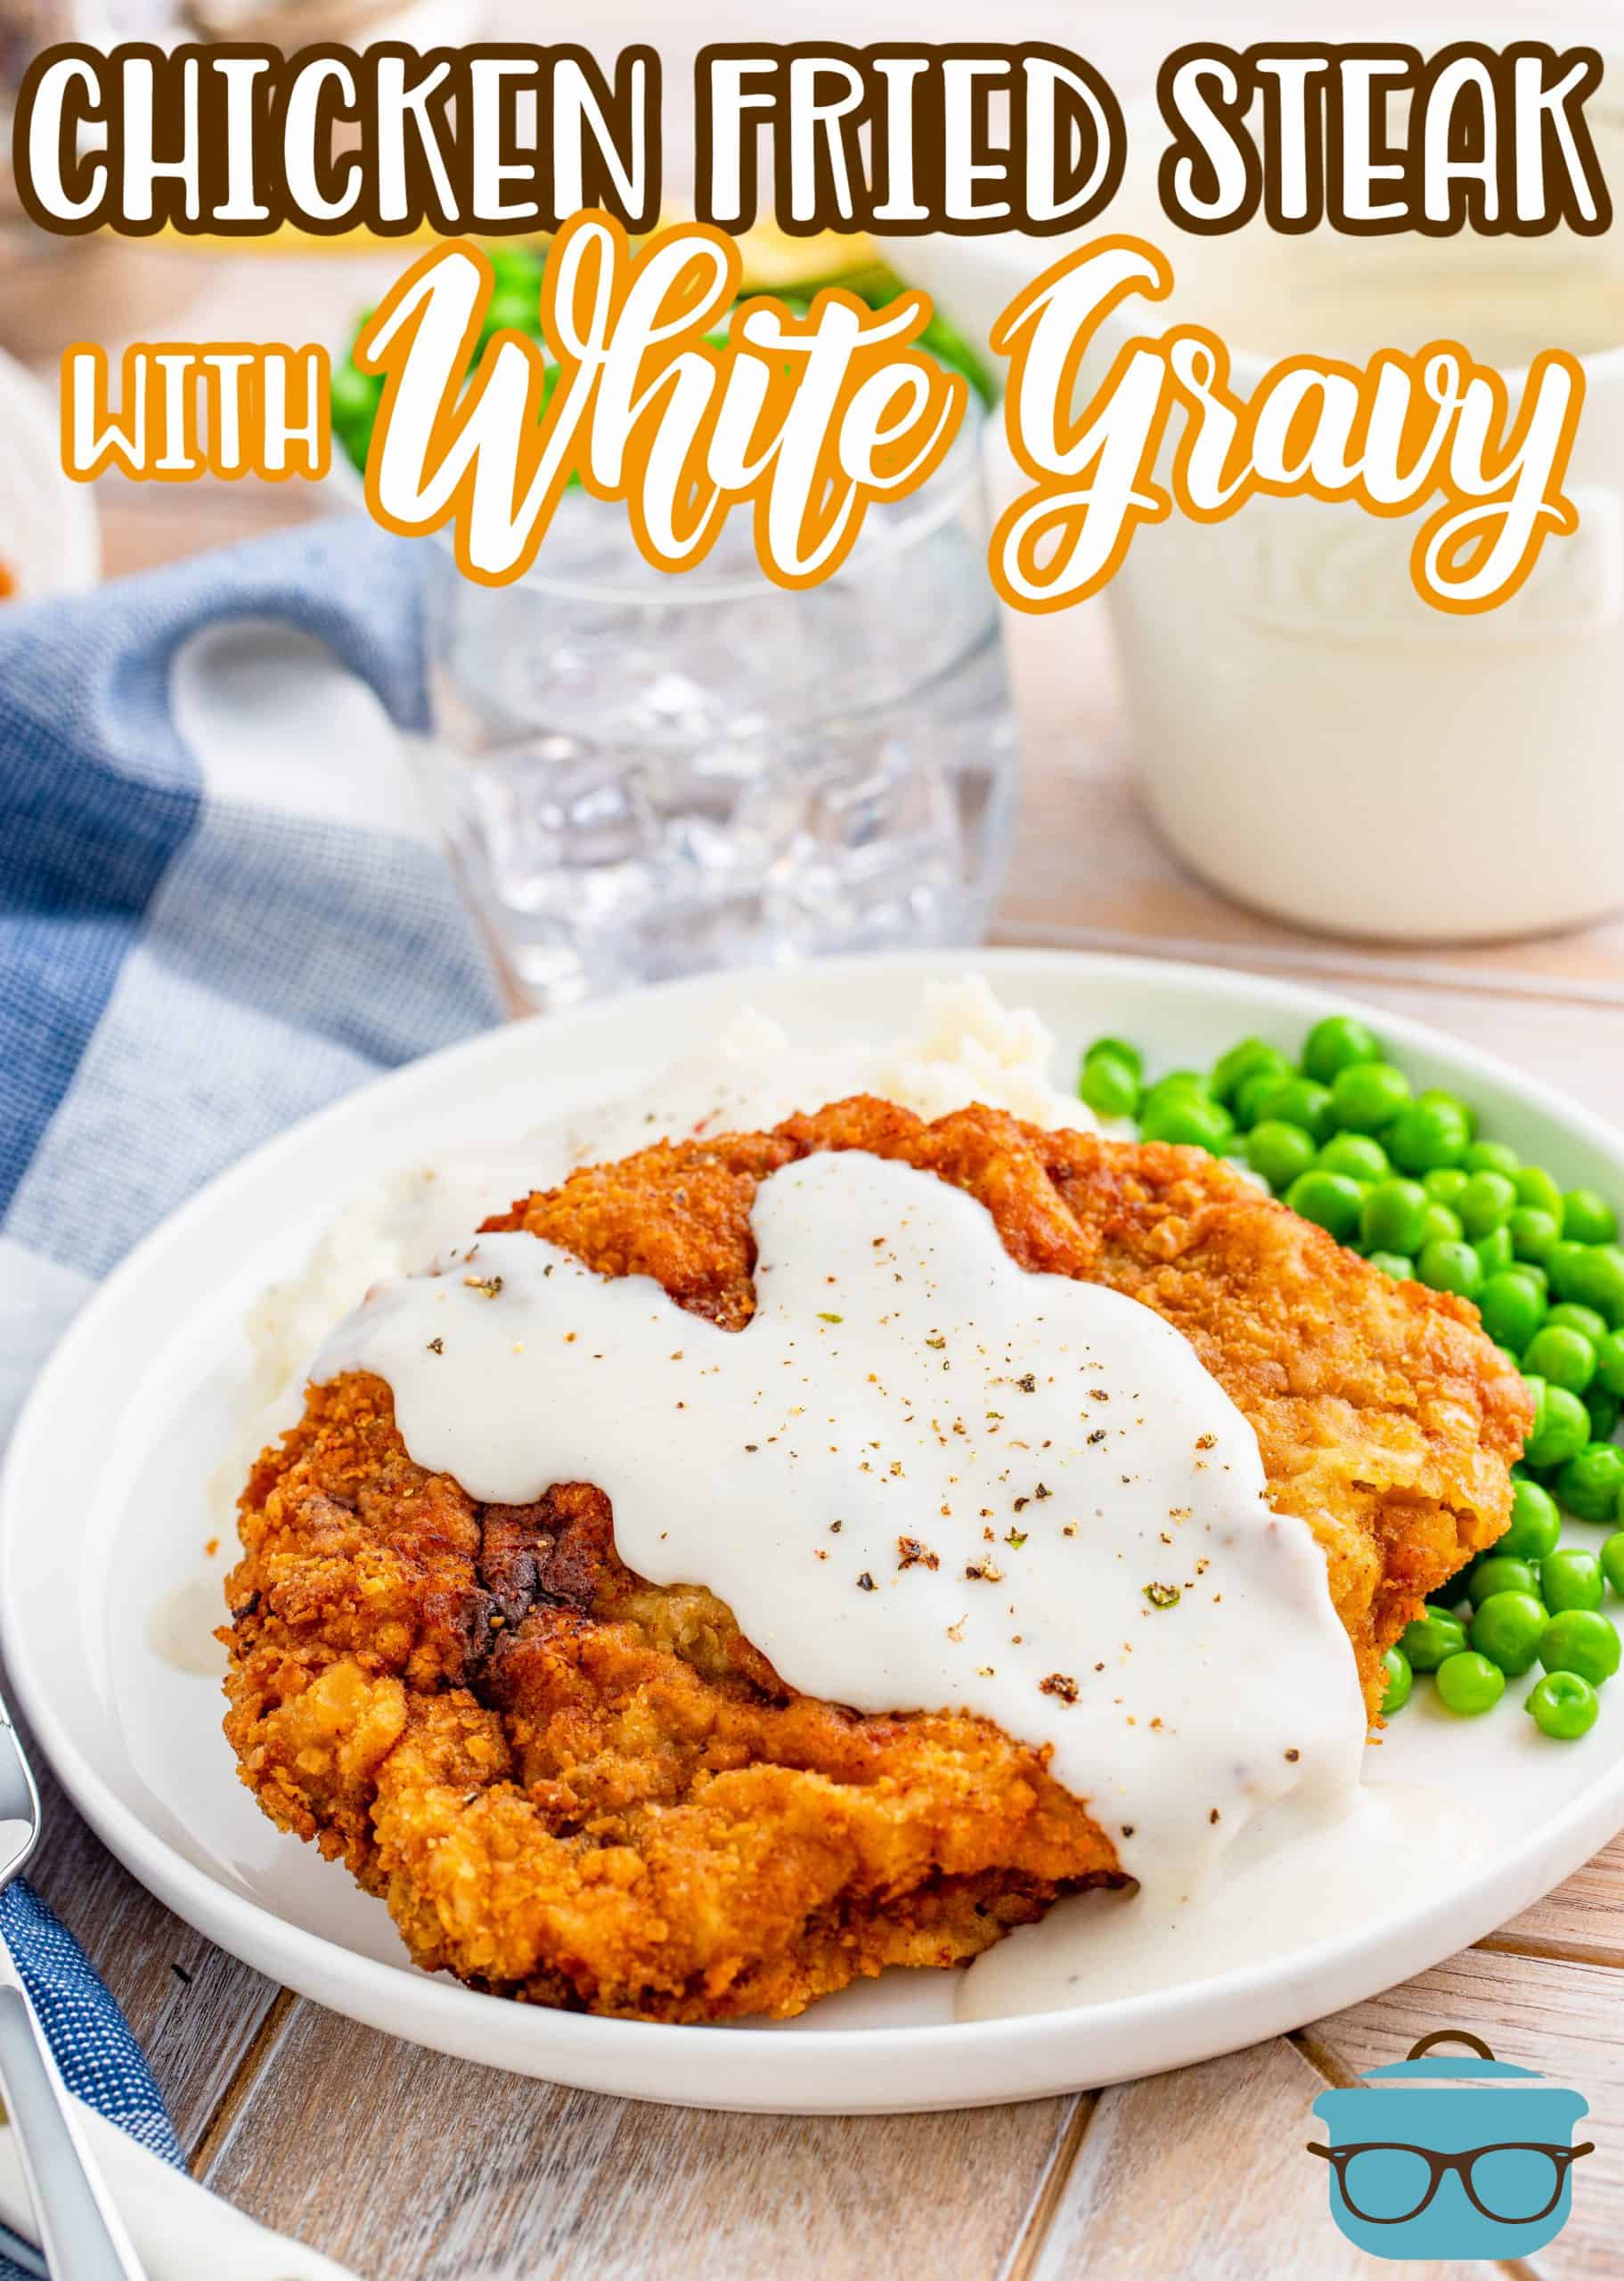 Chicken Fried Steak with Sawmill Gravy recipe from The Country Cook, shown on a plate with peas and mashed potatoes.